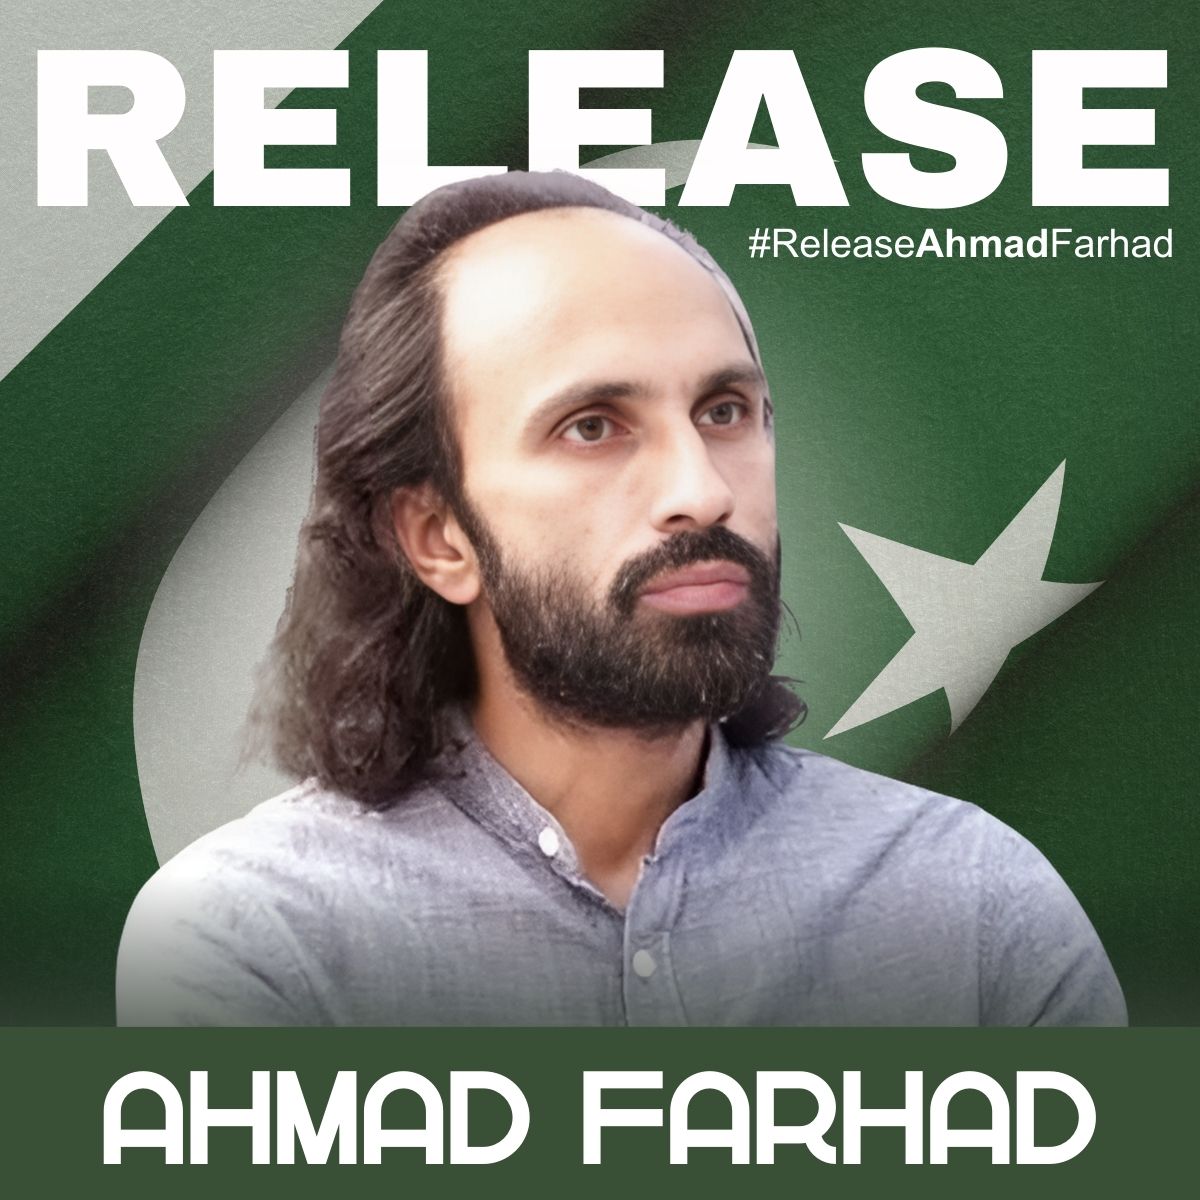 Journalist and a poet @AhmadFarhadReal, known for his fearless speeches and poetry against state oppression, was abducted from his Pakistan home on May 15, 2024. Over a week later, there is still no information on his whereabouts.@UN @aljazeeraeng @SkyNews #ReleaseAhmadfarhad